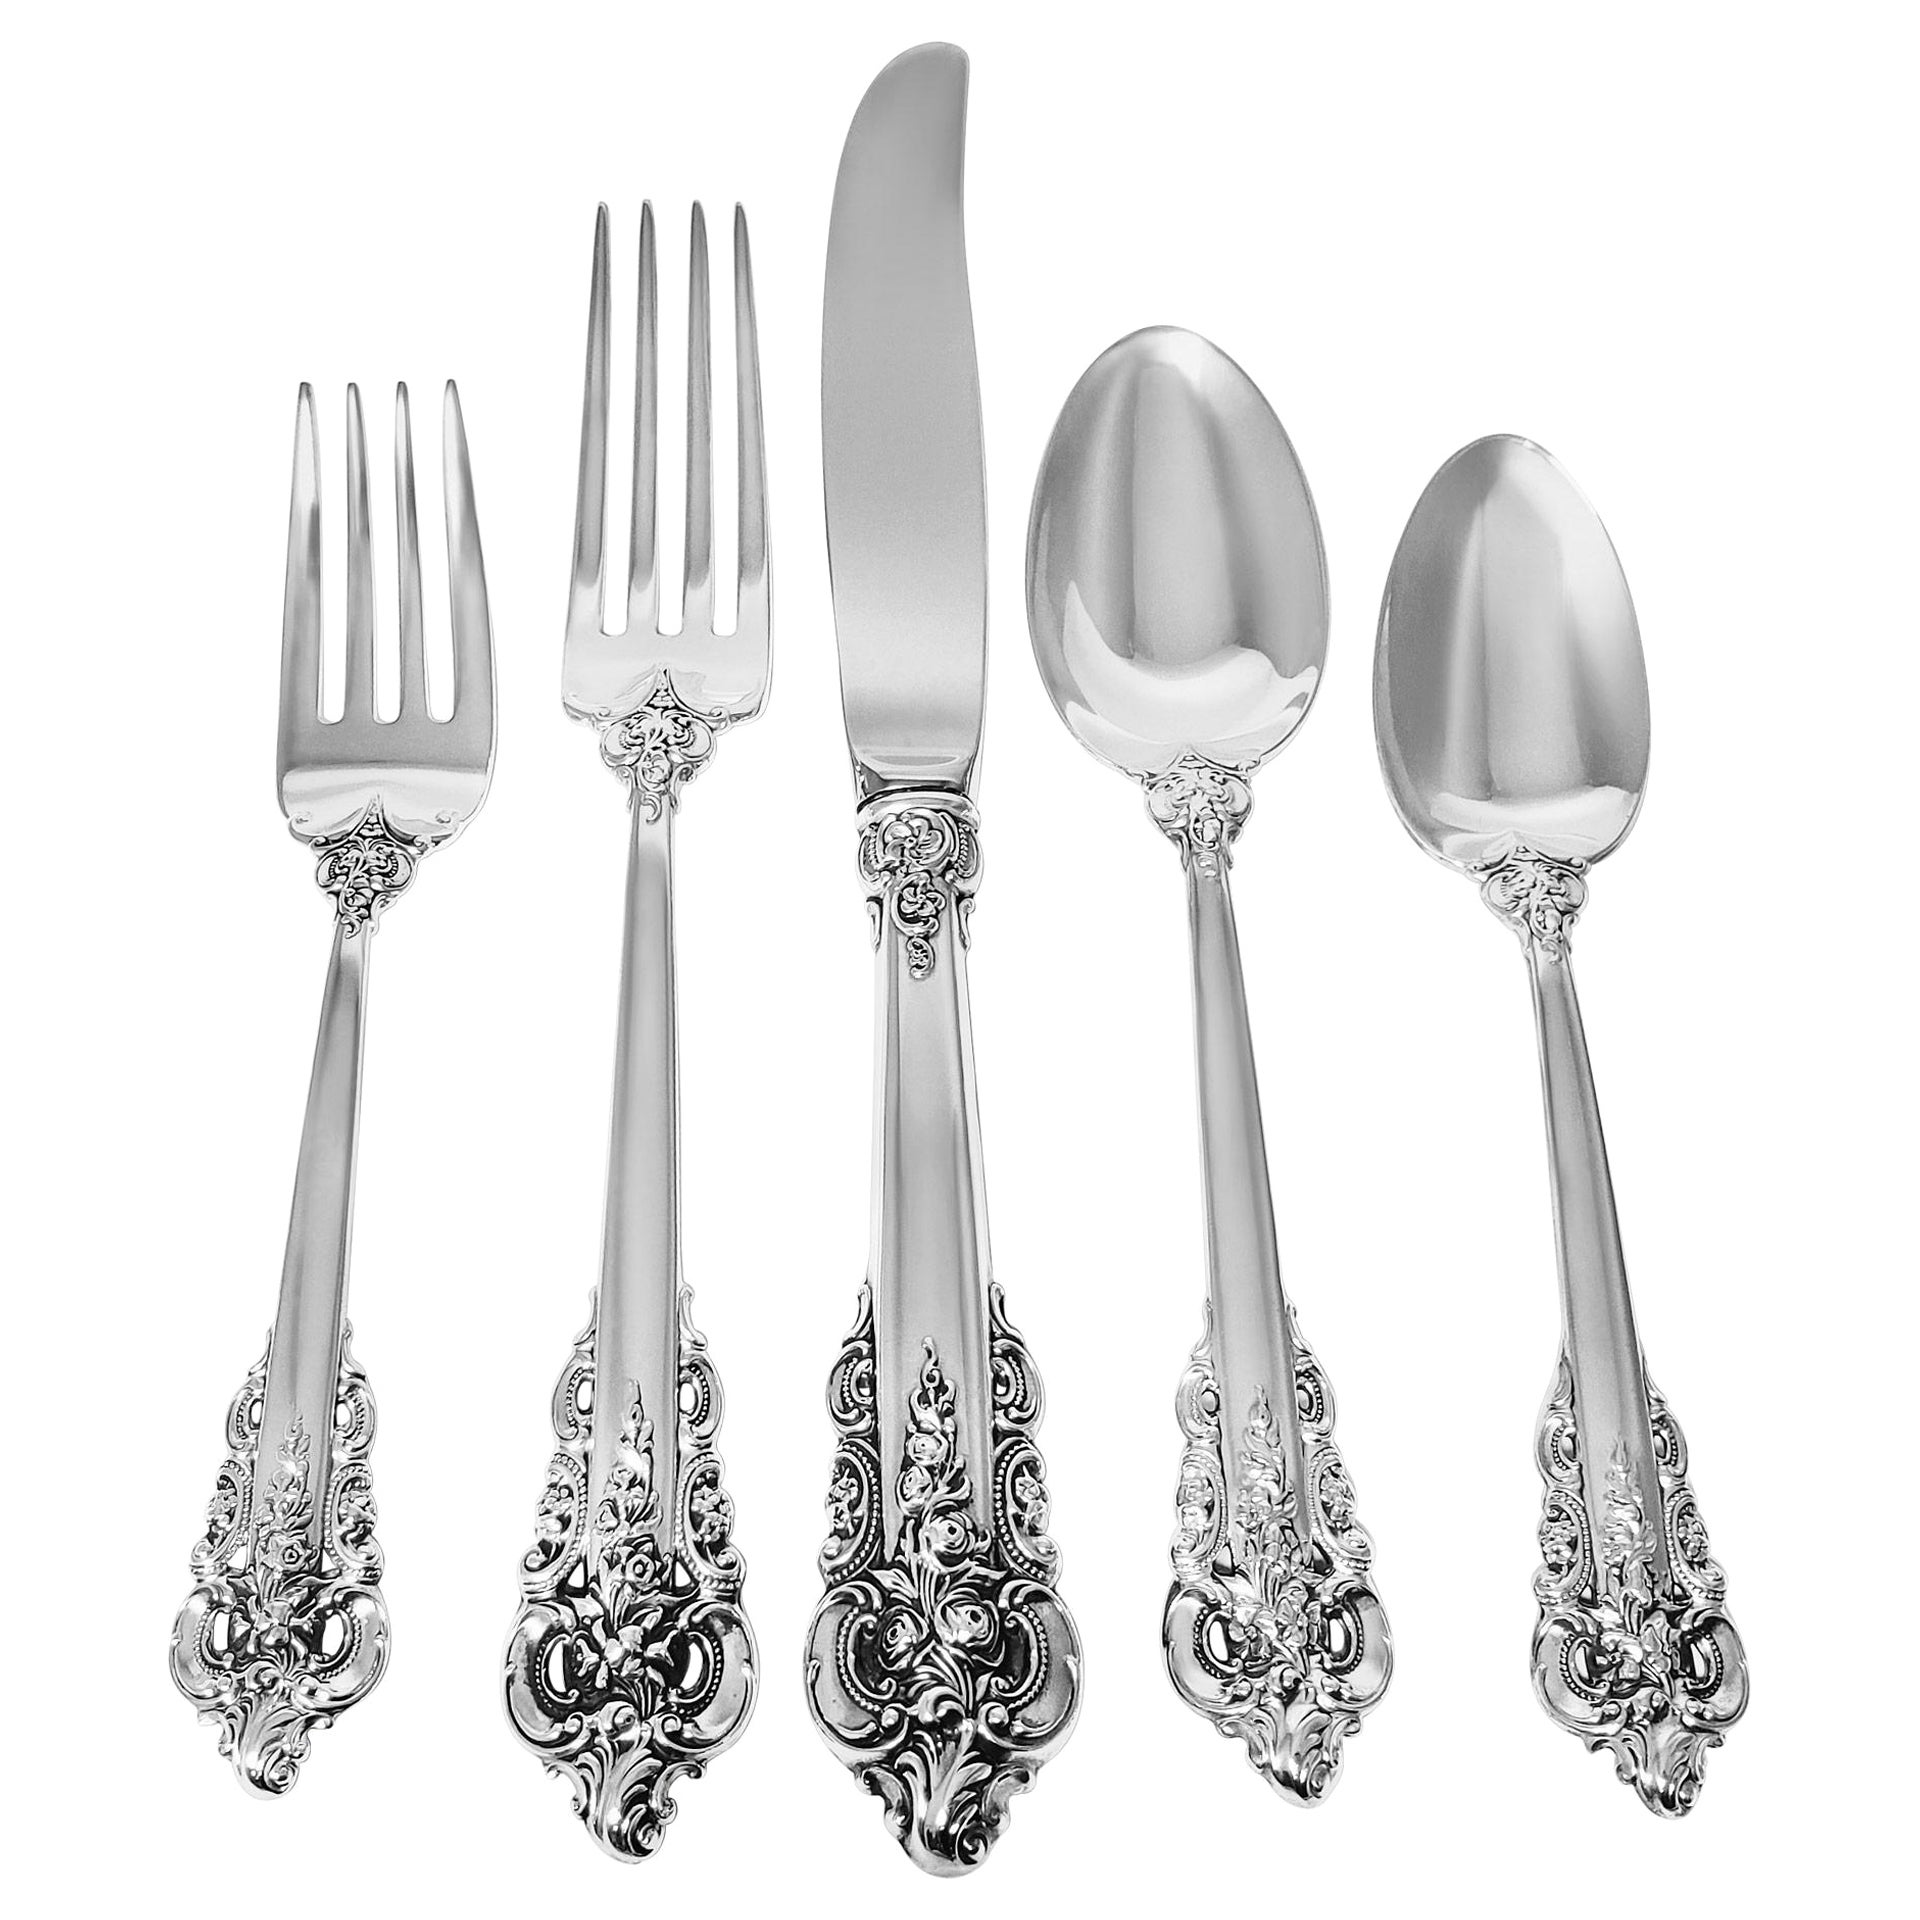 Sterling Silver Flatware Set Grande Baroque Patented by Wallace in 1941, 5 Place For Sale